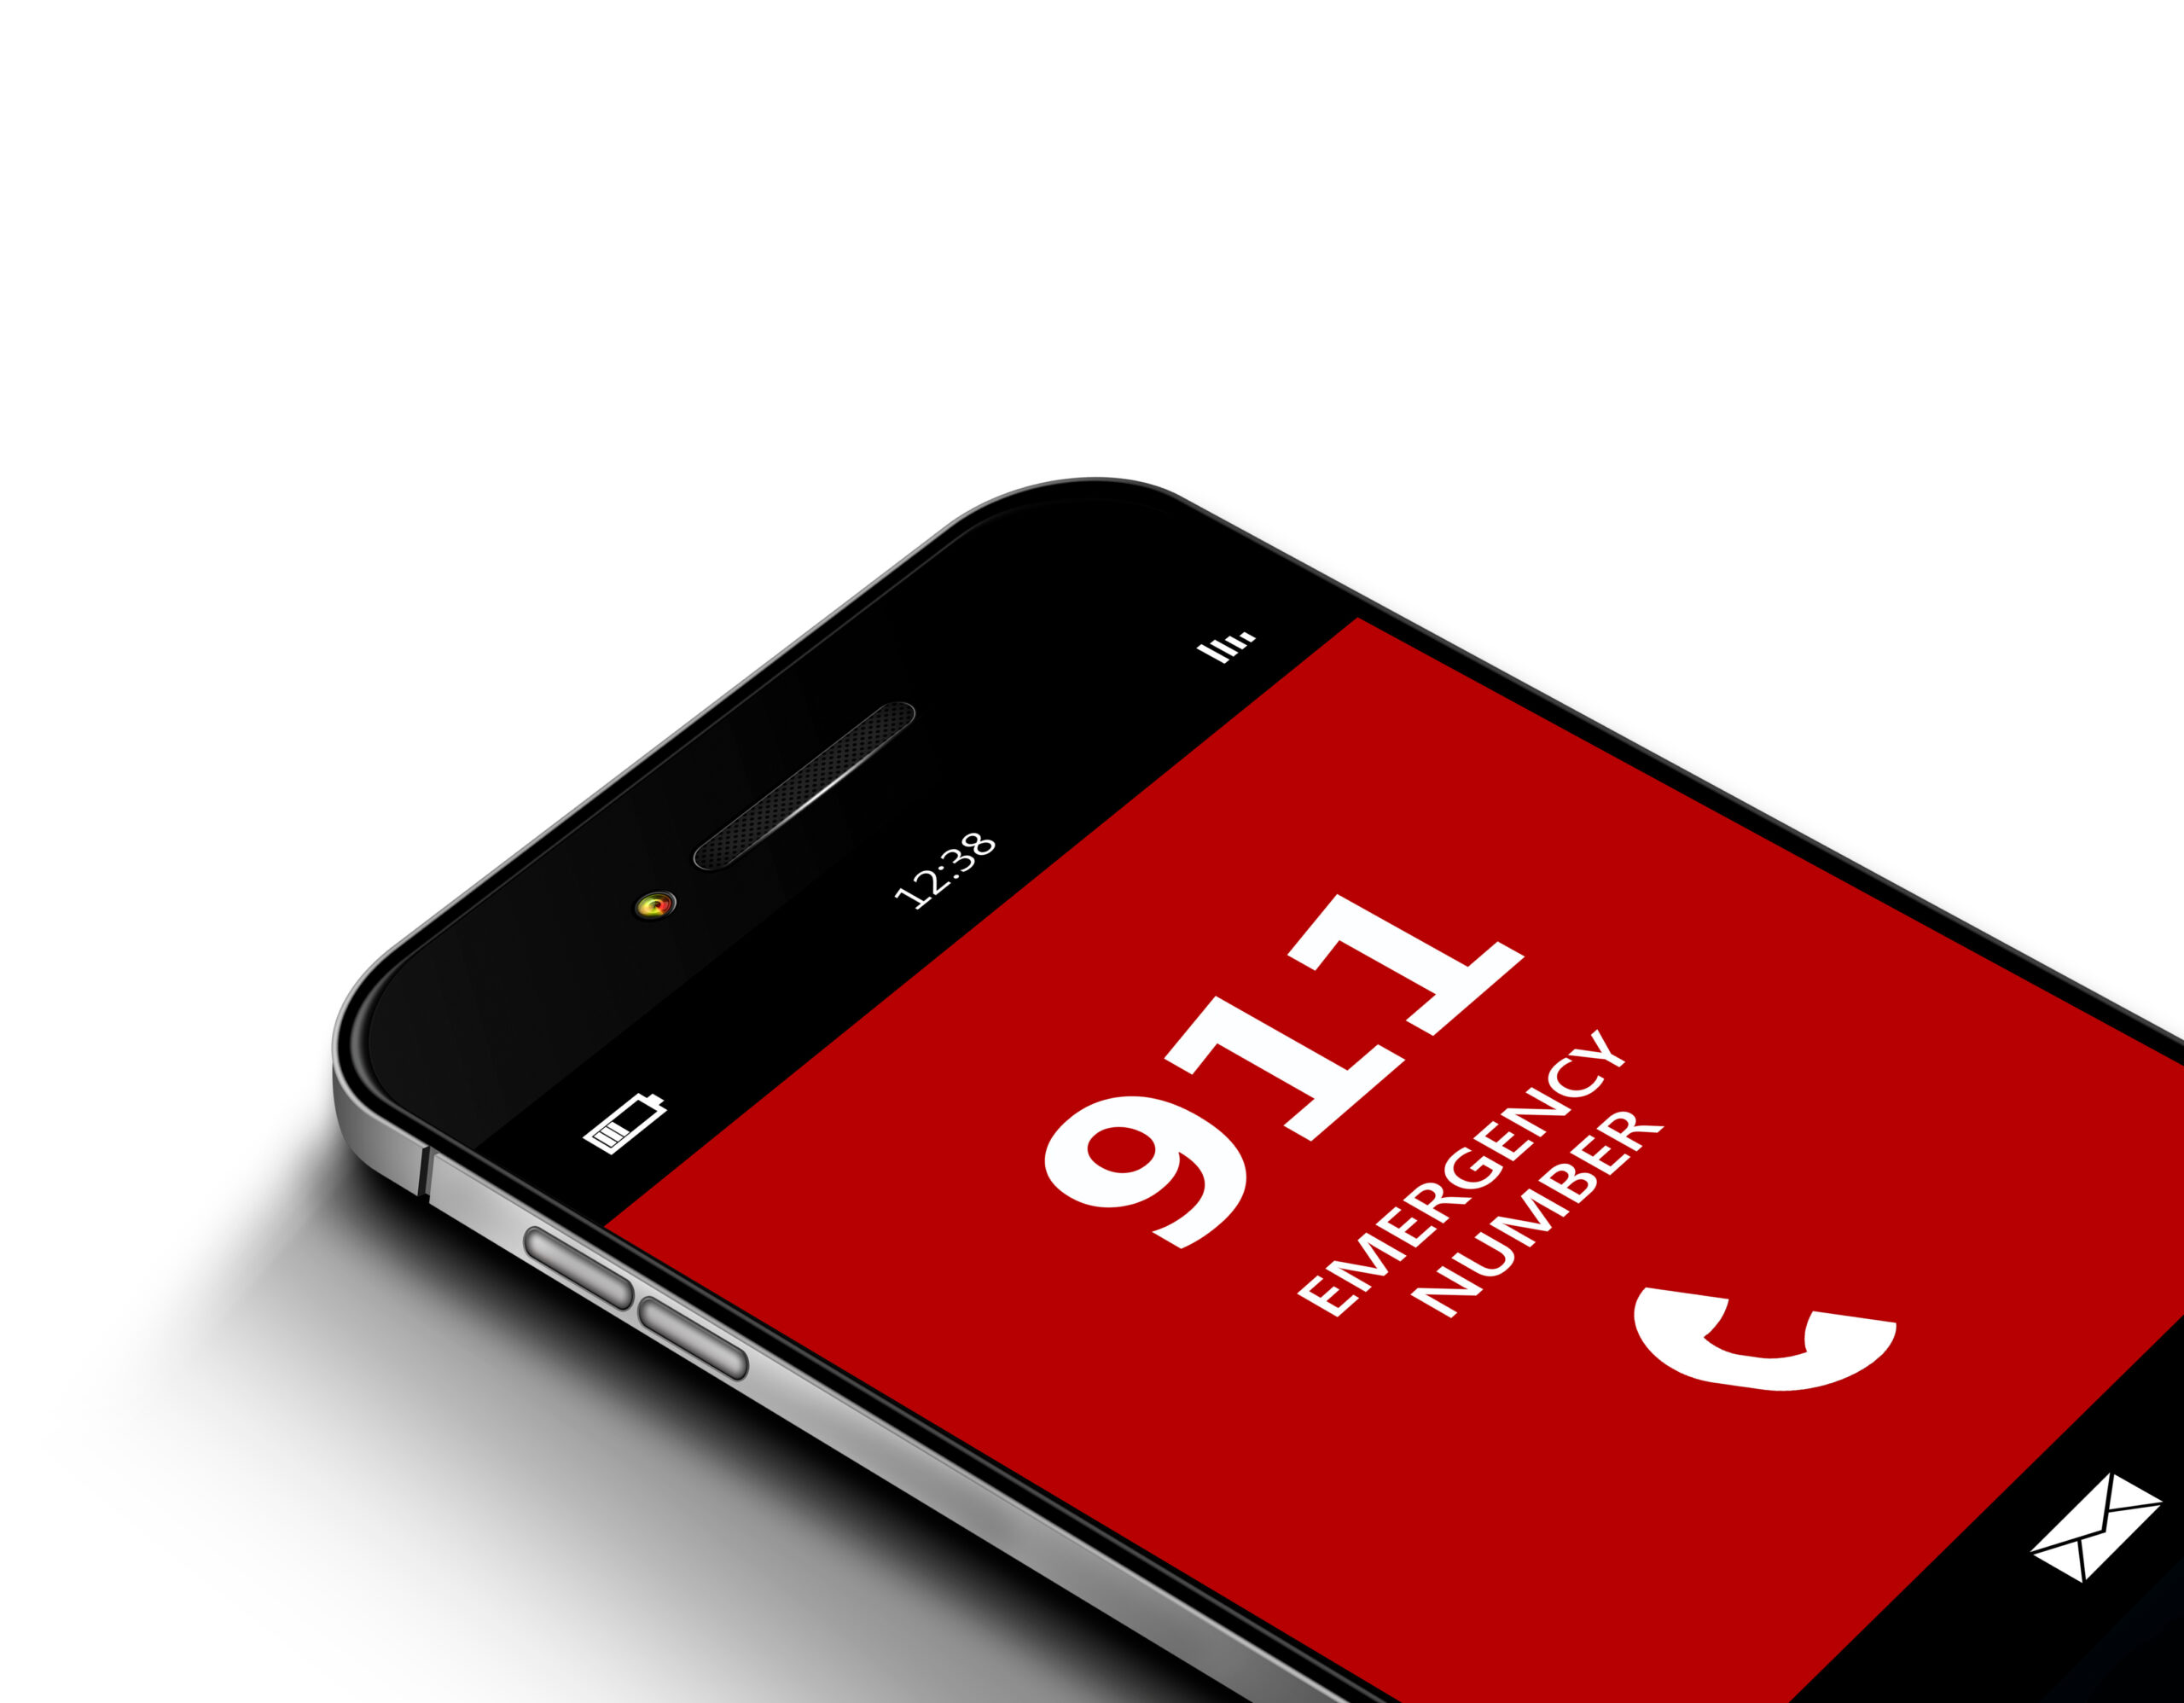 Mobile Phone With 911 Emergency Number Lying On White